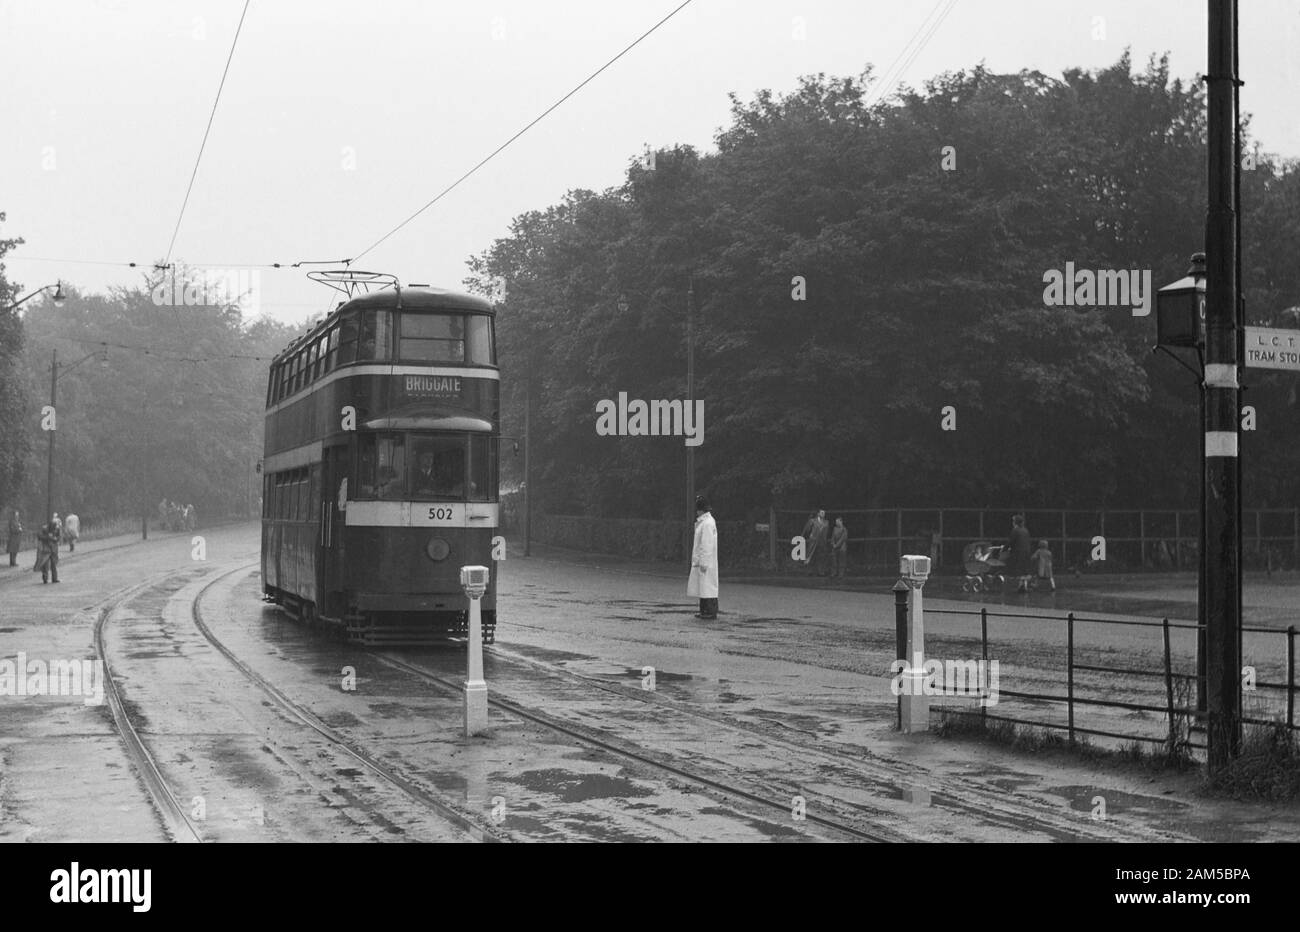 Leeds (Feltham) tram no. 502 on route to Briggate. Image taken in 1959 before the decommissioning of the Tramway network. Stock Photo